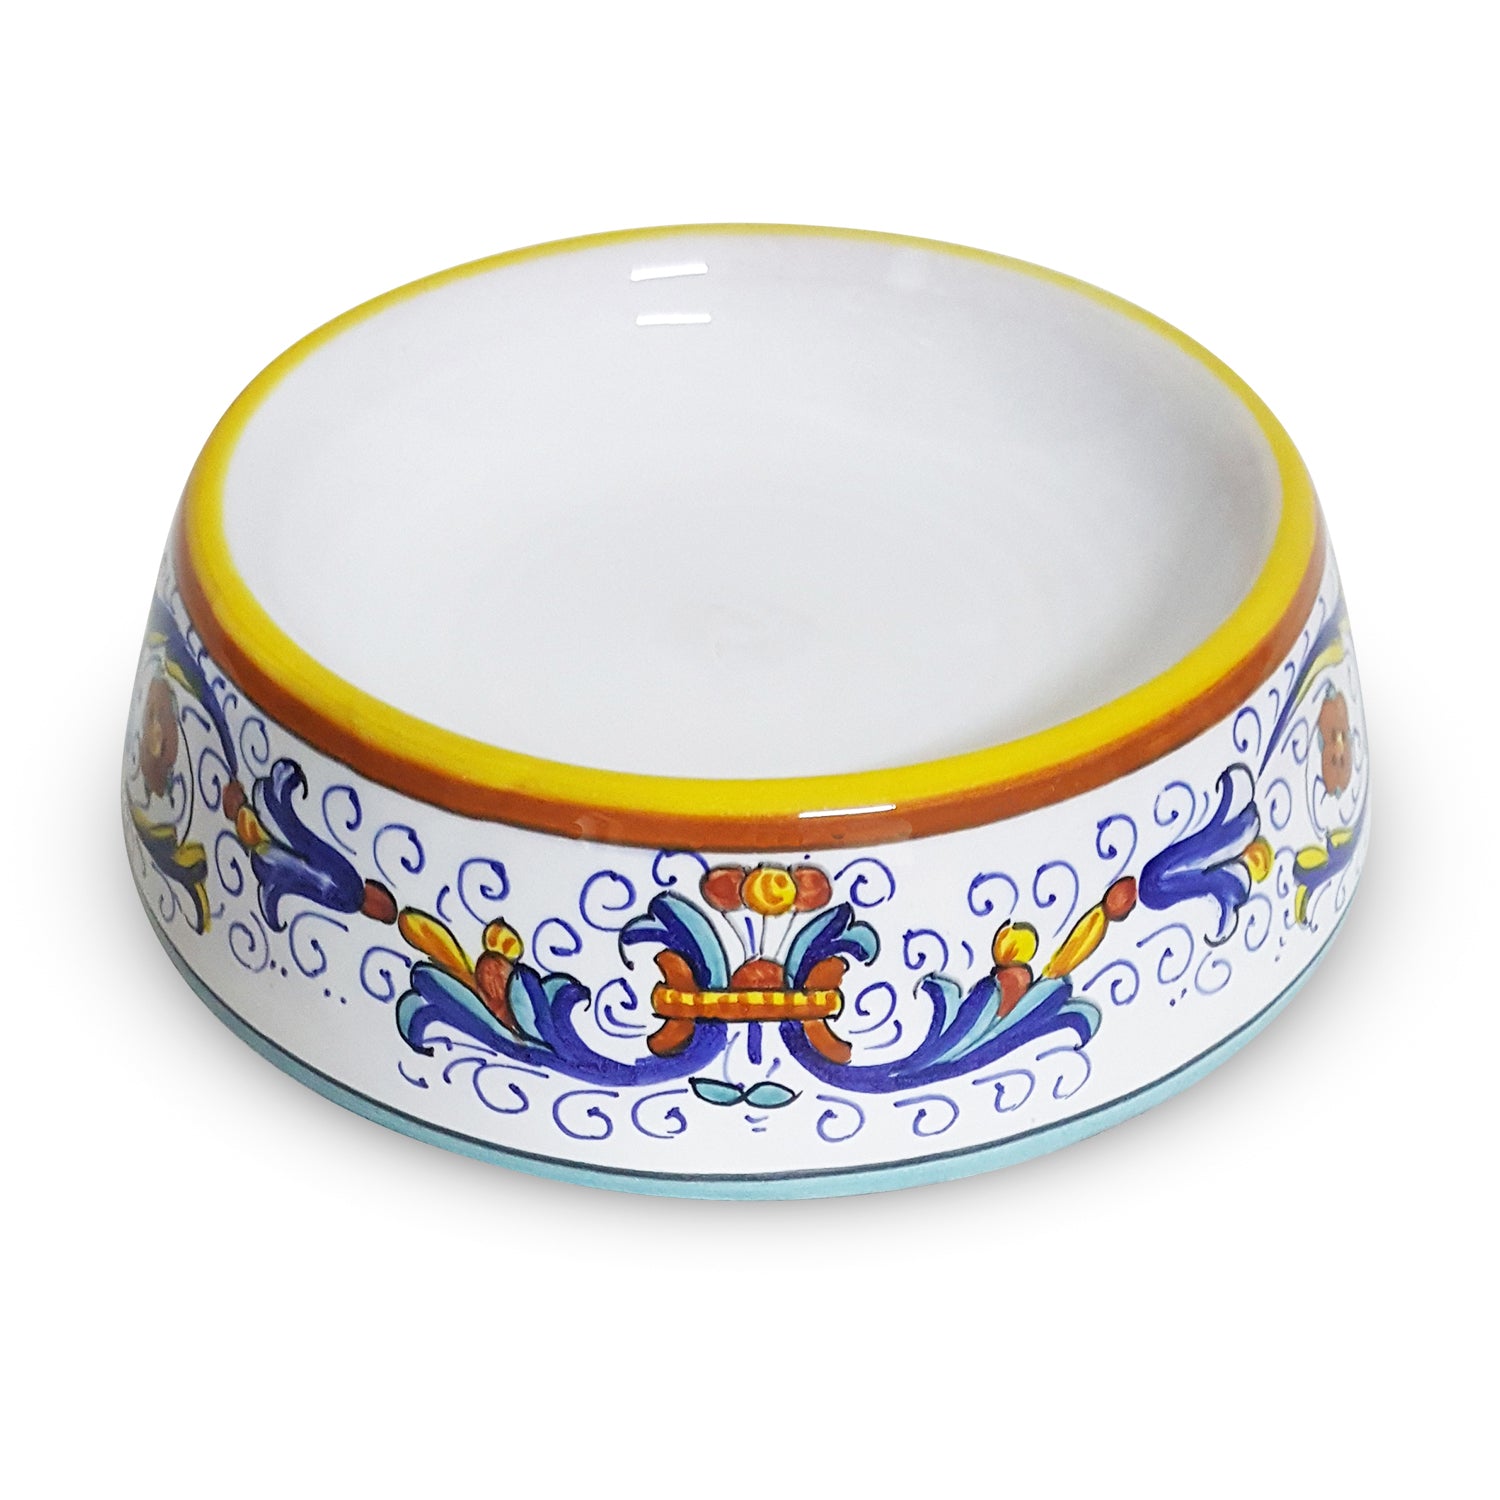 MOD Ricco Deruta Dog Bowl, Large, ceramics, pottery, italian design, majolica, handmade, handcrafted, handpainted, home decor, kitchen art, home goods, deruta, majolica, Artisan, treasures, traditional art, modern art, gift ideas, style, SF, shop small business, artists, shop online, landmark store, legacy, one of a kind, limited edition, gift guide, gift shop, retail shop, decorations, shopping, italy, home staging, home decorating, home interiors